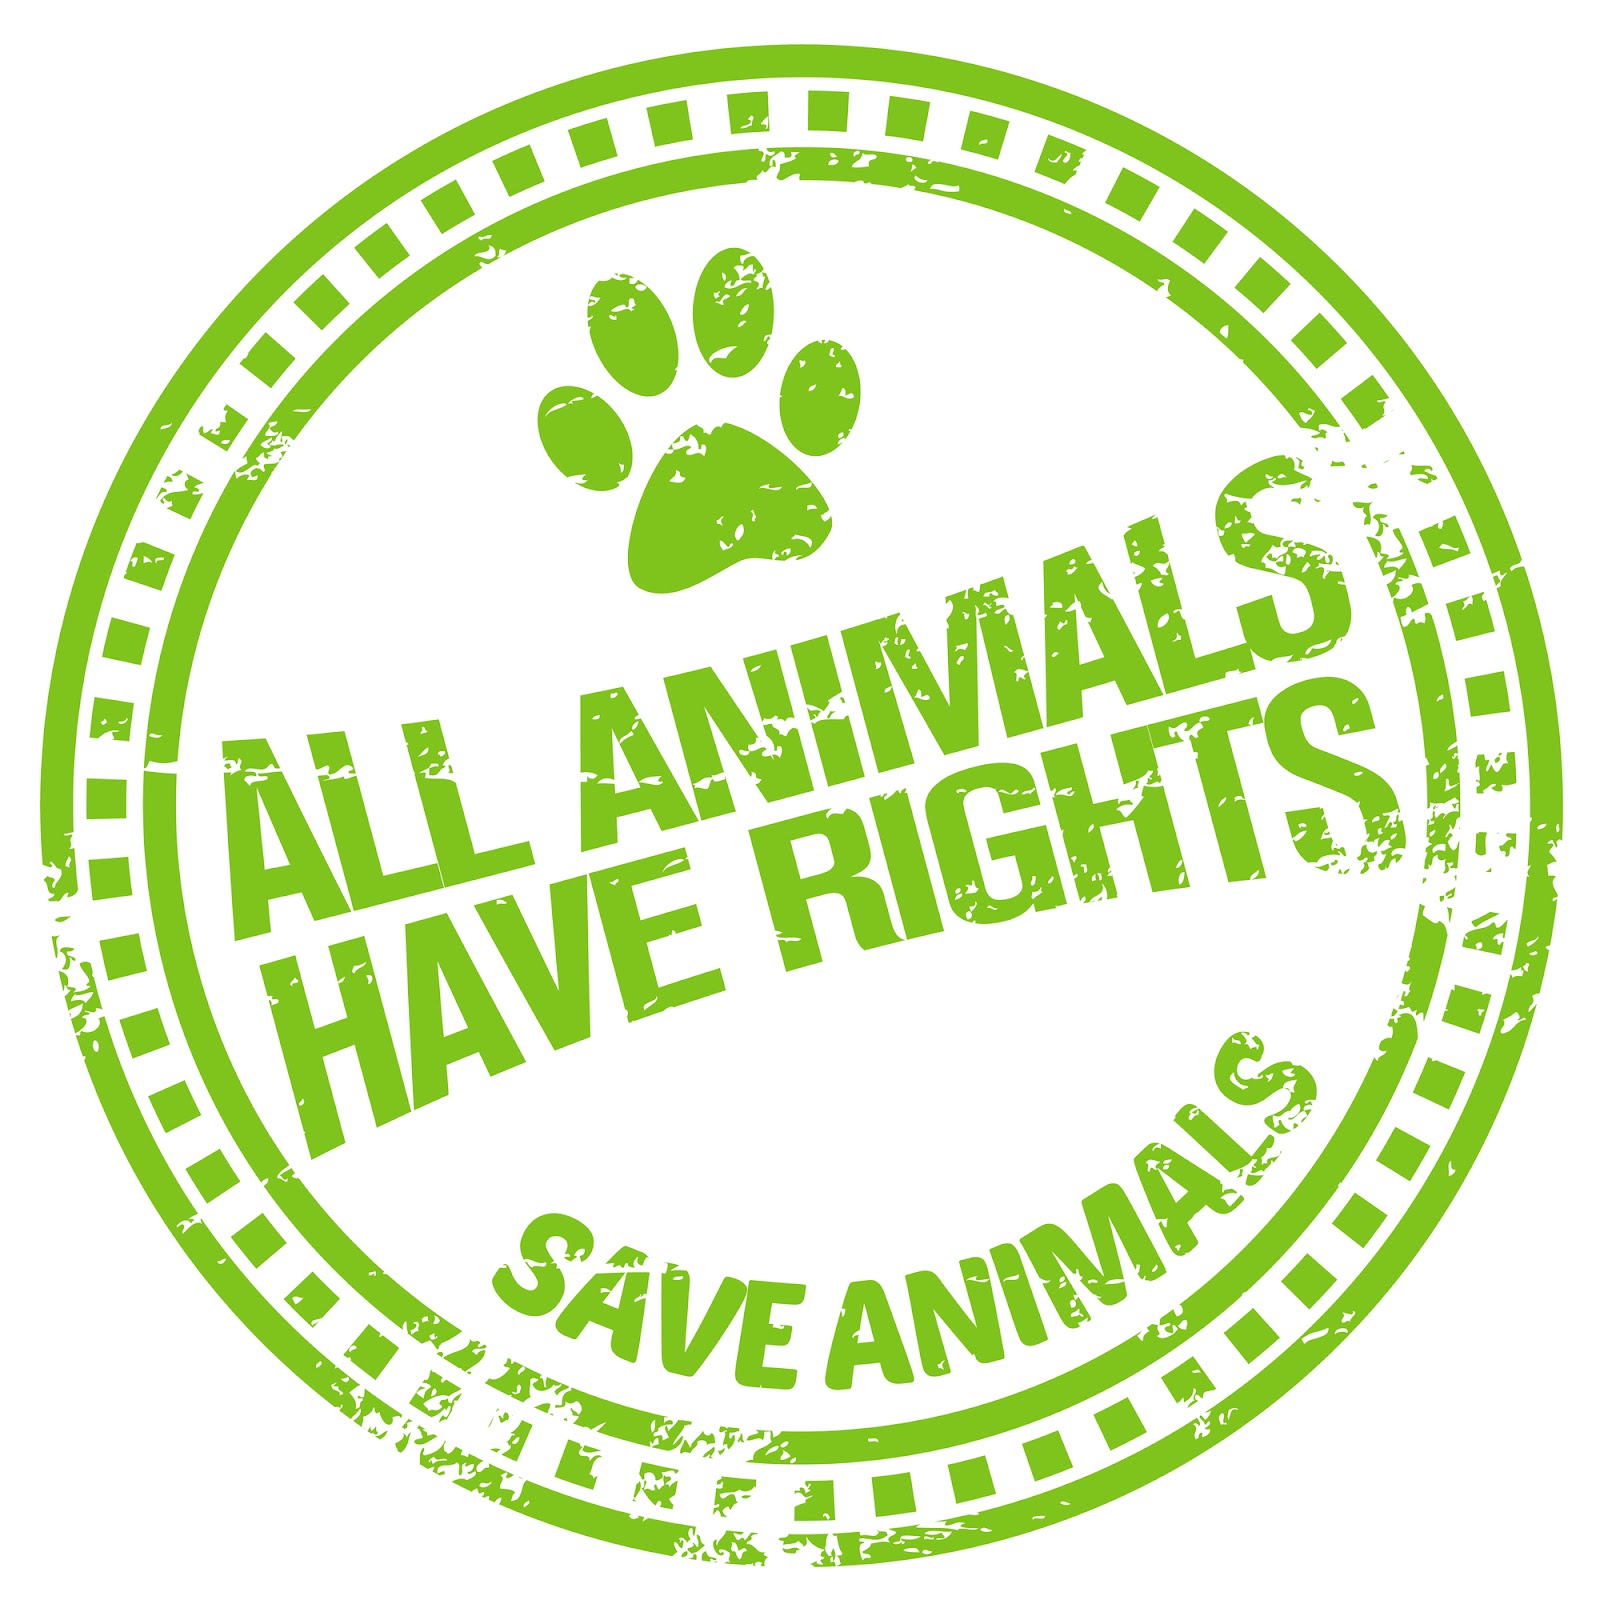 animal rights research paper introduction